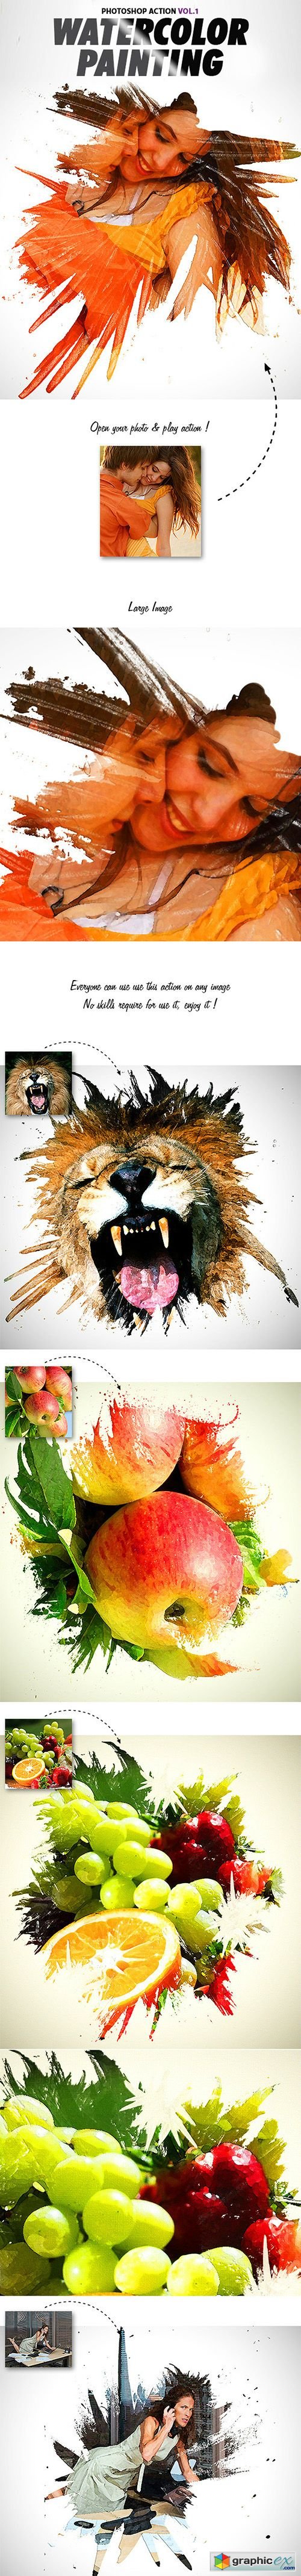 Watercolor Painting Vol1 Photoshop Action